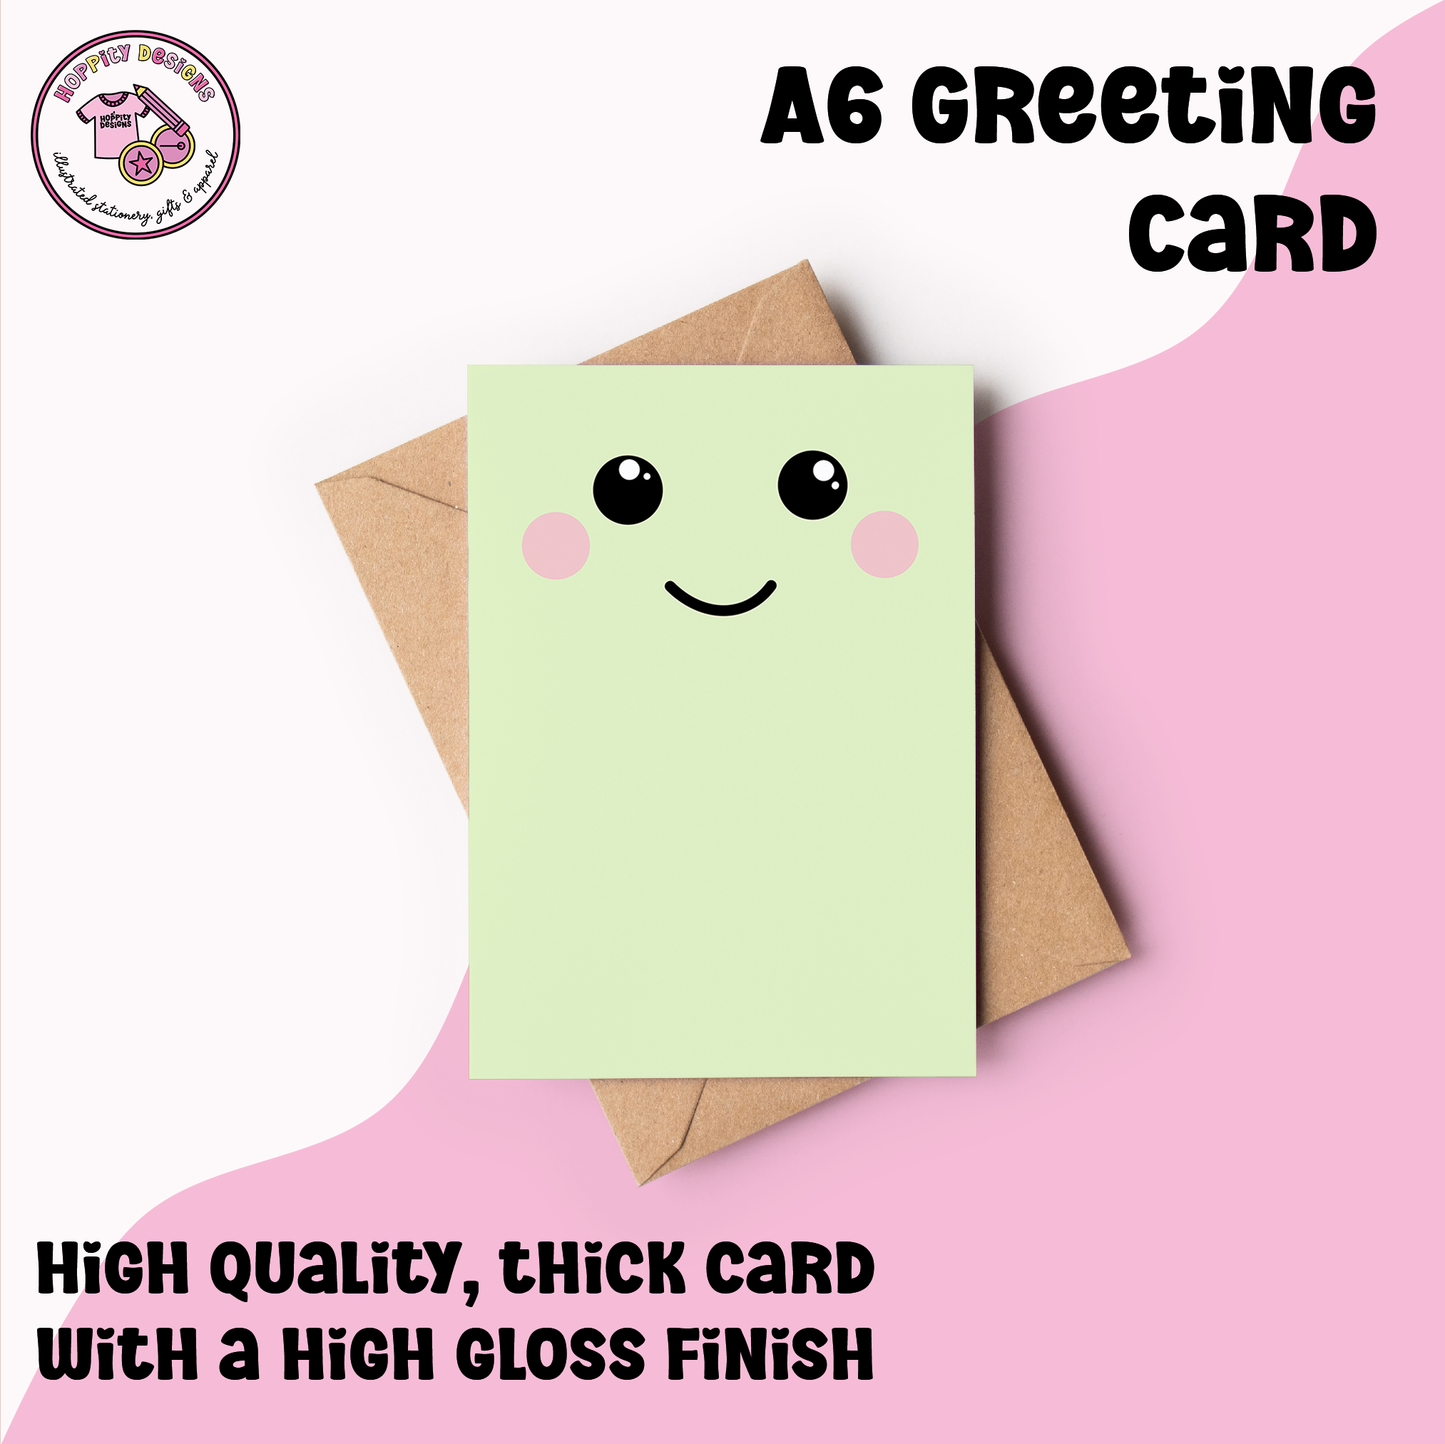 Kawaii Style Card for Any Occasion